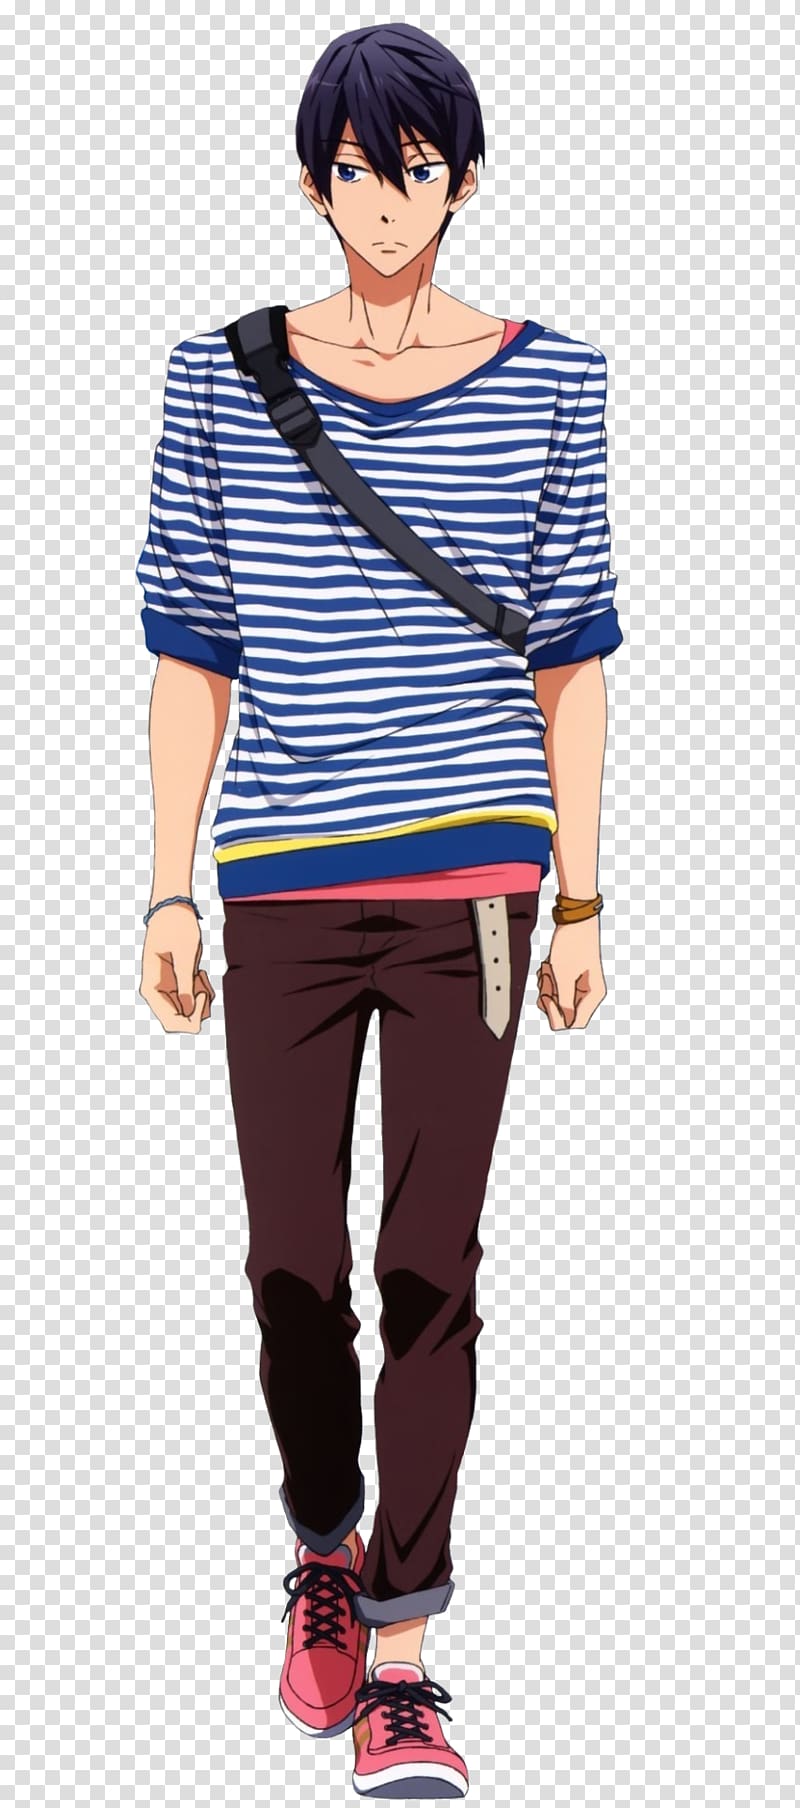 Haruka Nanase Clothing Anime Casual attire, Anime transparent background PNG clipart